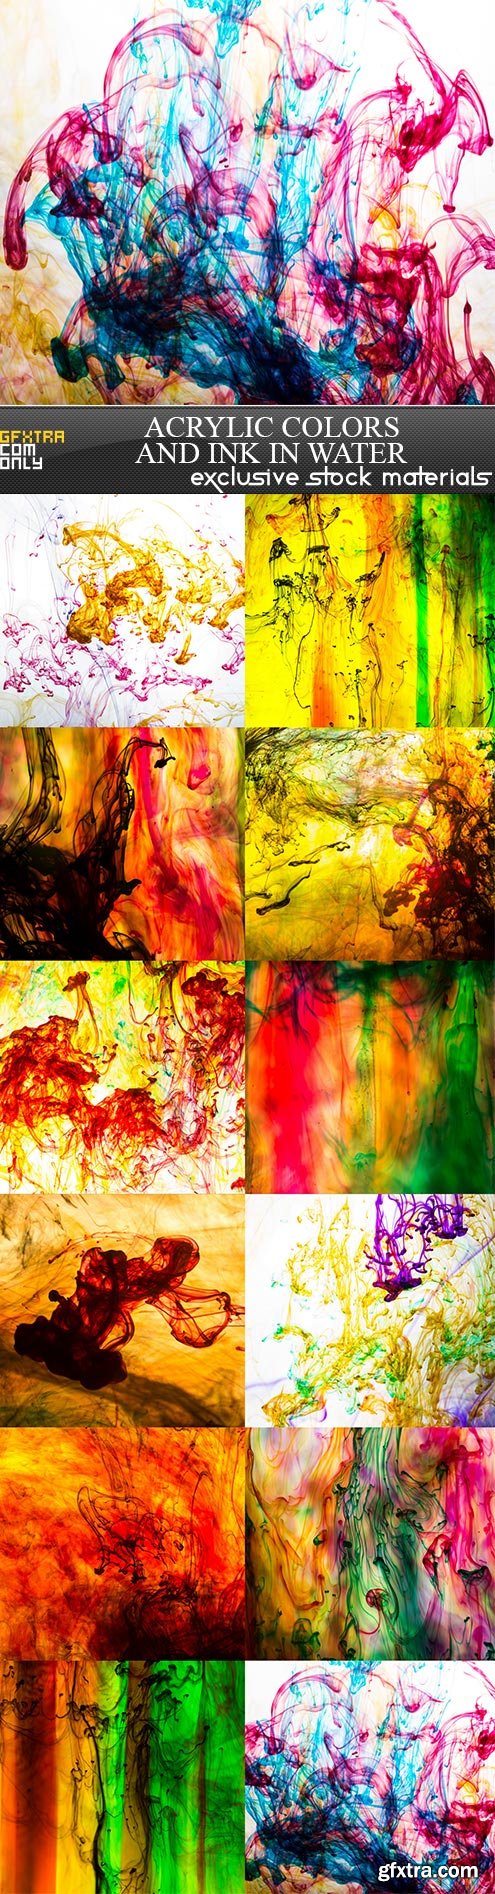 Acrylic colors and ink in water, 12 x UHQ JPEG